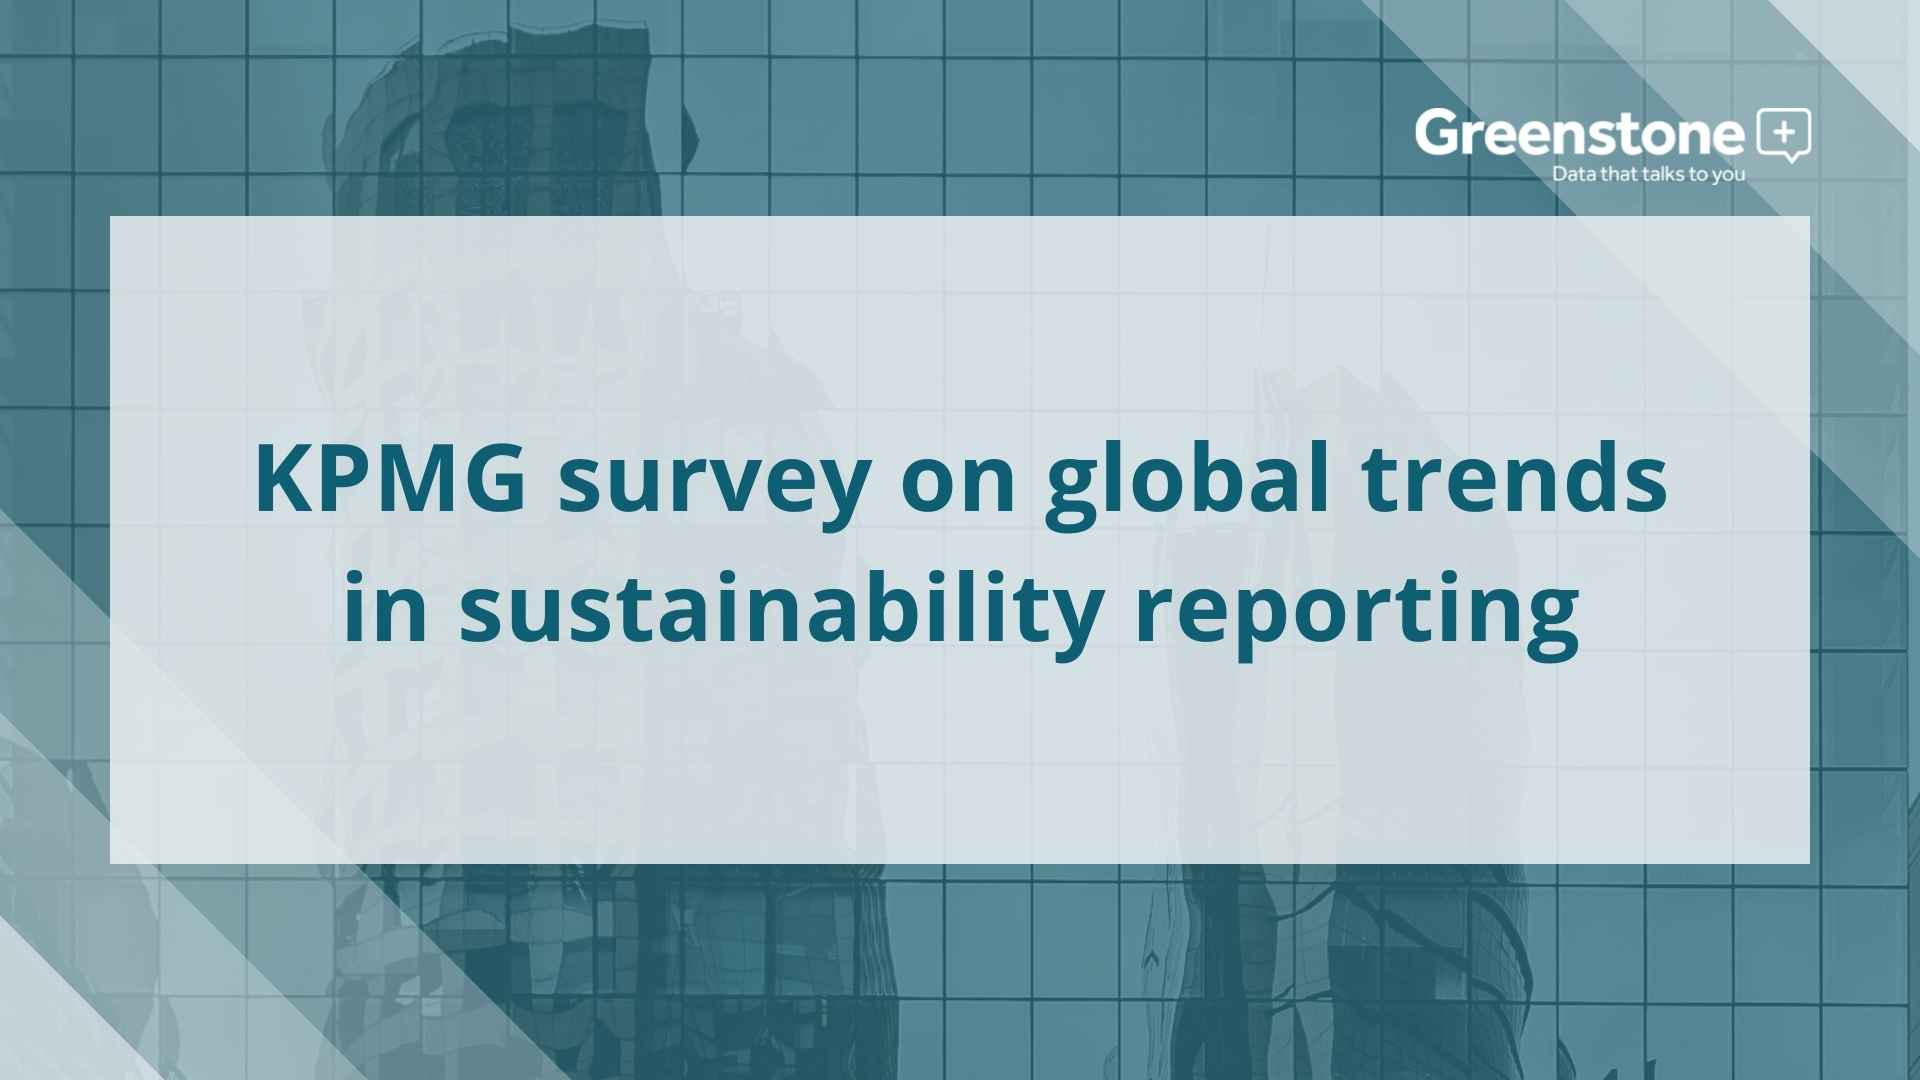 KPMG survey on global trends in sustainability reporting